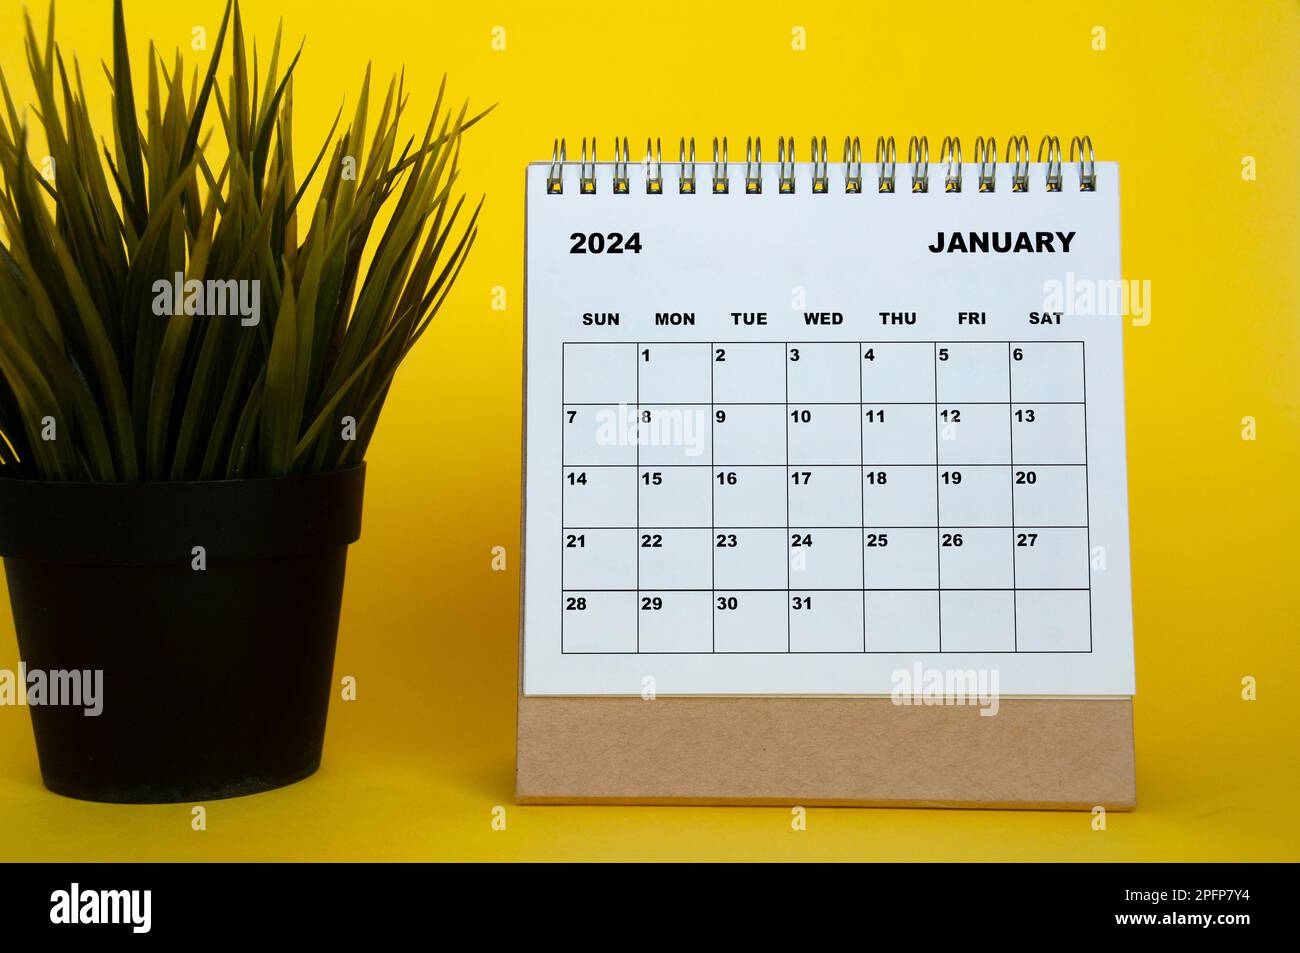 January 2024 month calendar with table plant on yellow cover background. Monthly calendar concept. Stock Photo